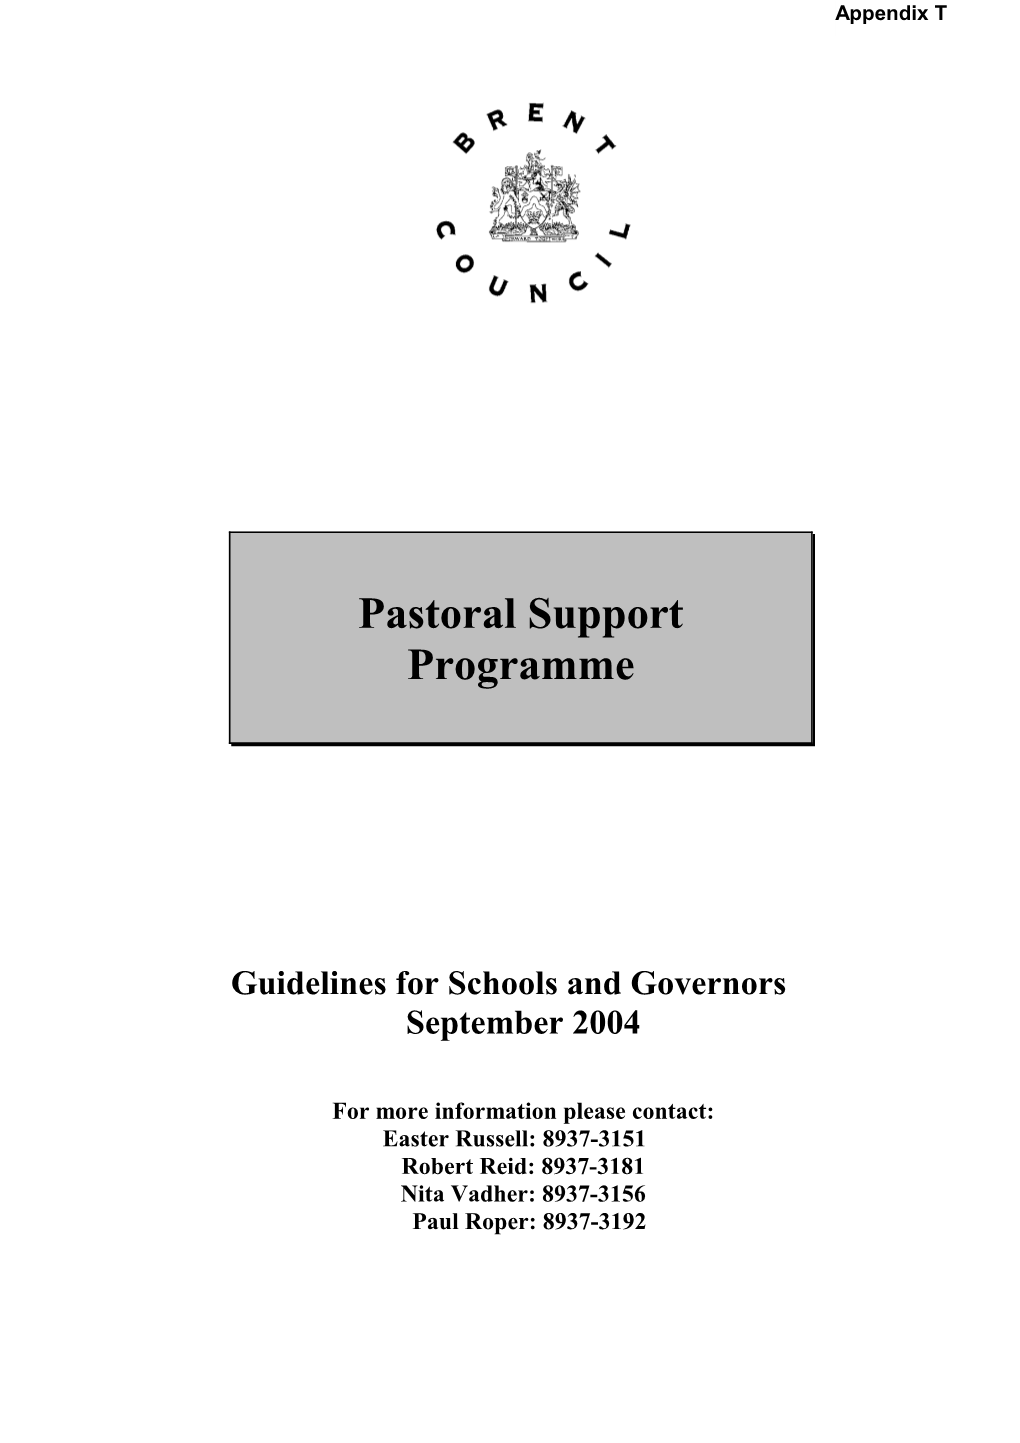 Pastoral Support Report